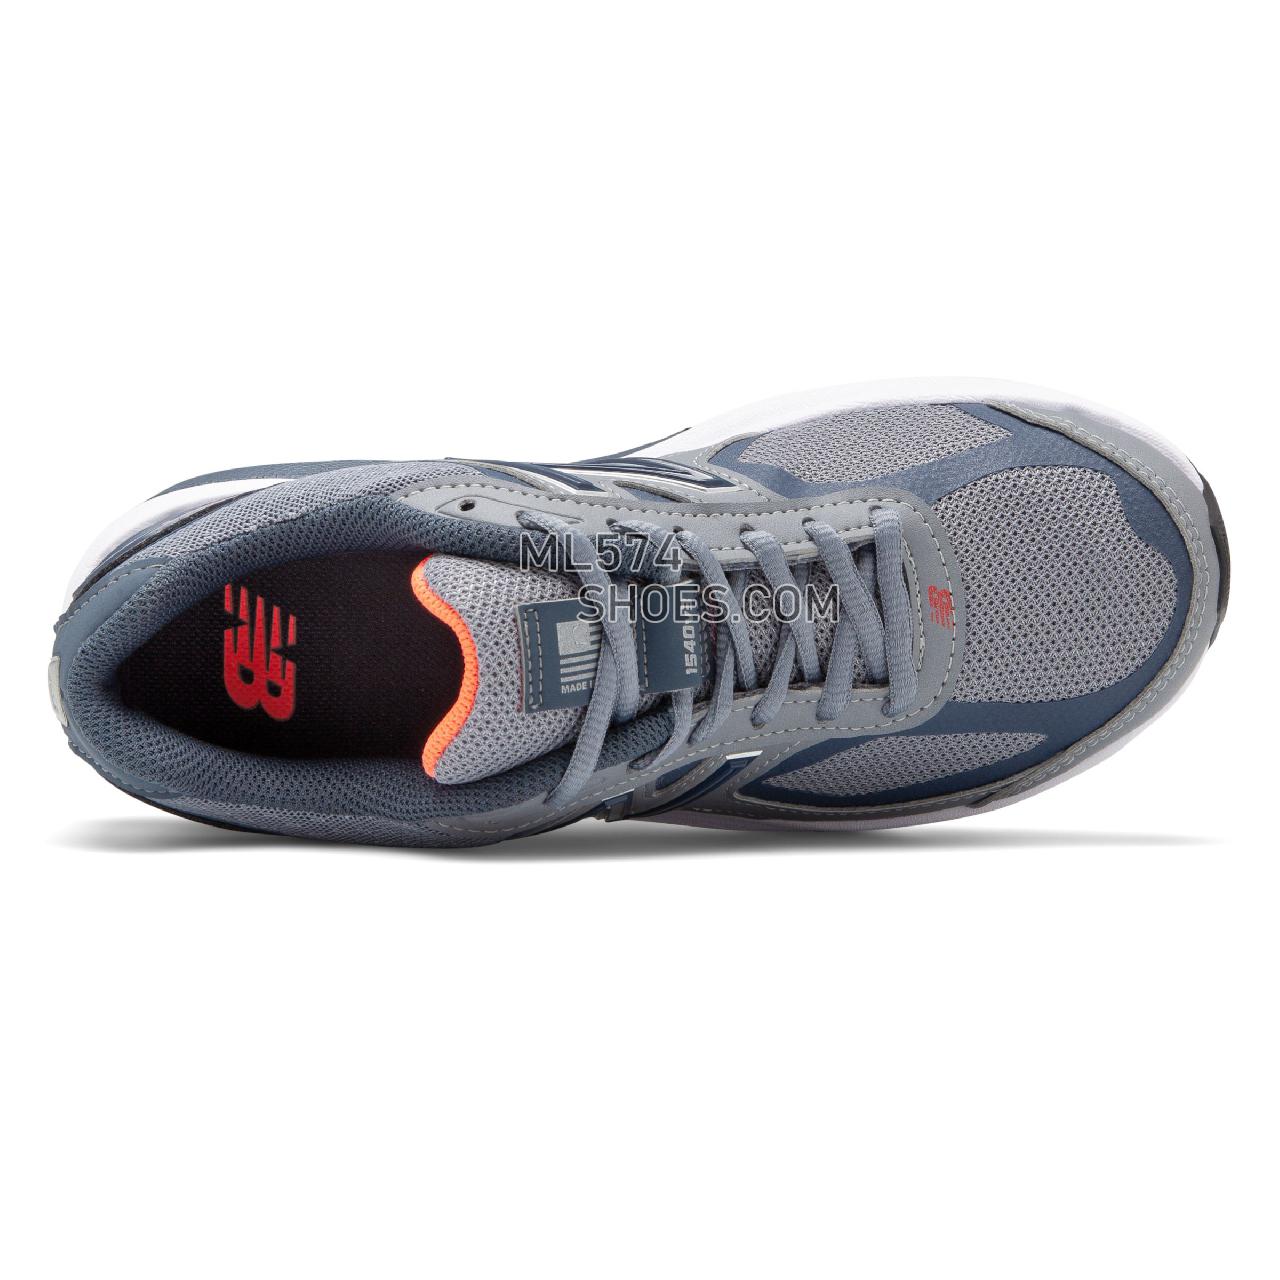 New Balance Made in US 1540v3 - Women's Motion Control Running - Gunmetal with Dragonfly - W1540GD3